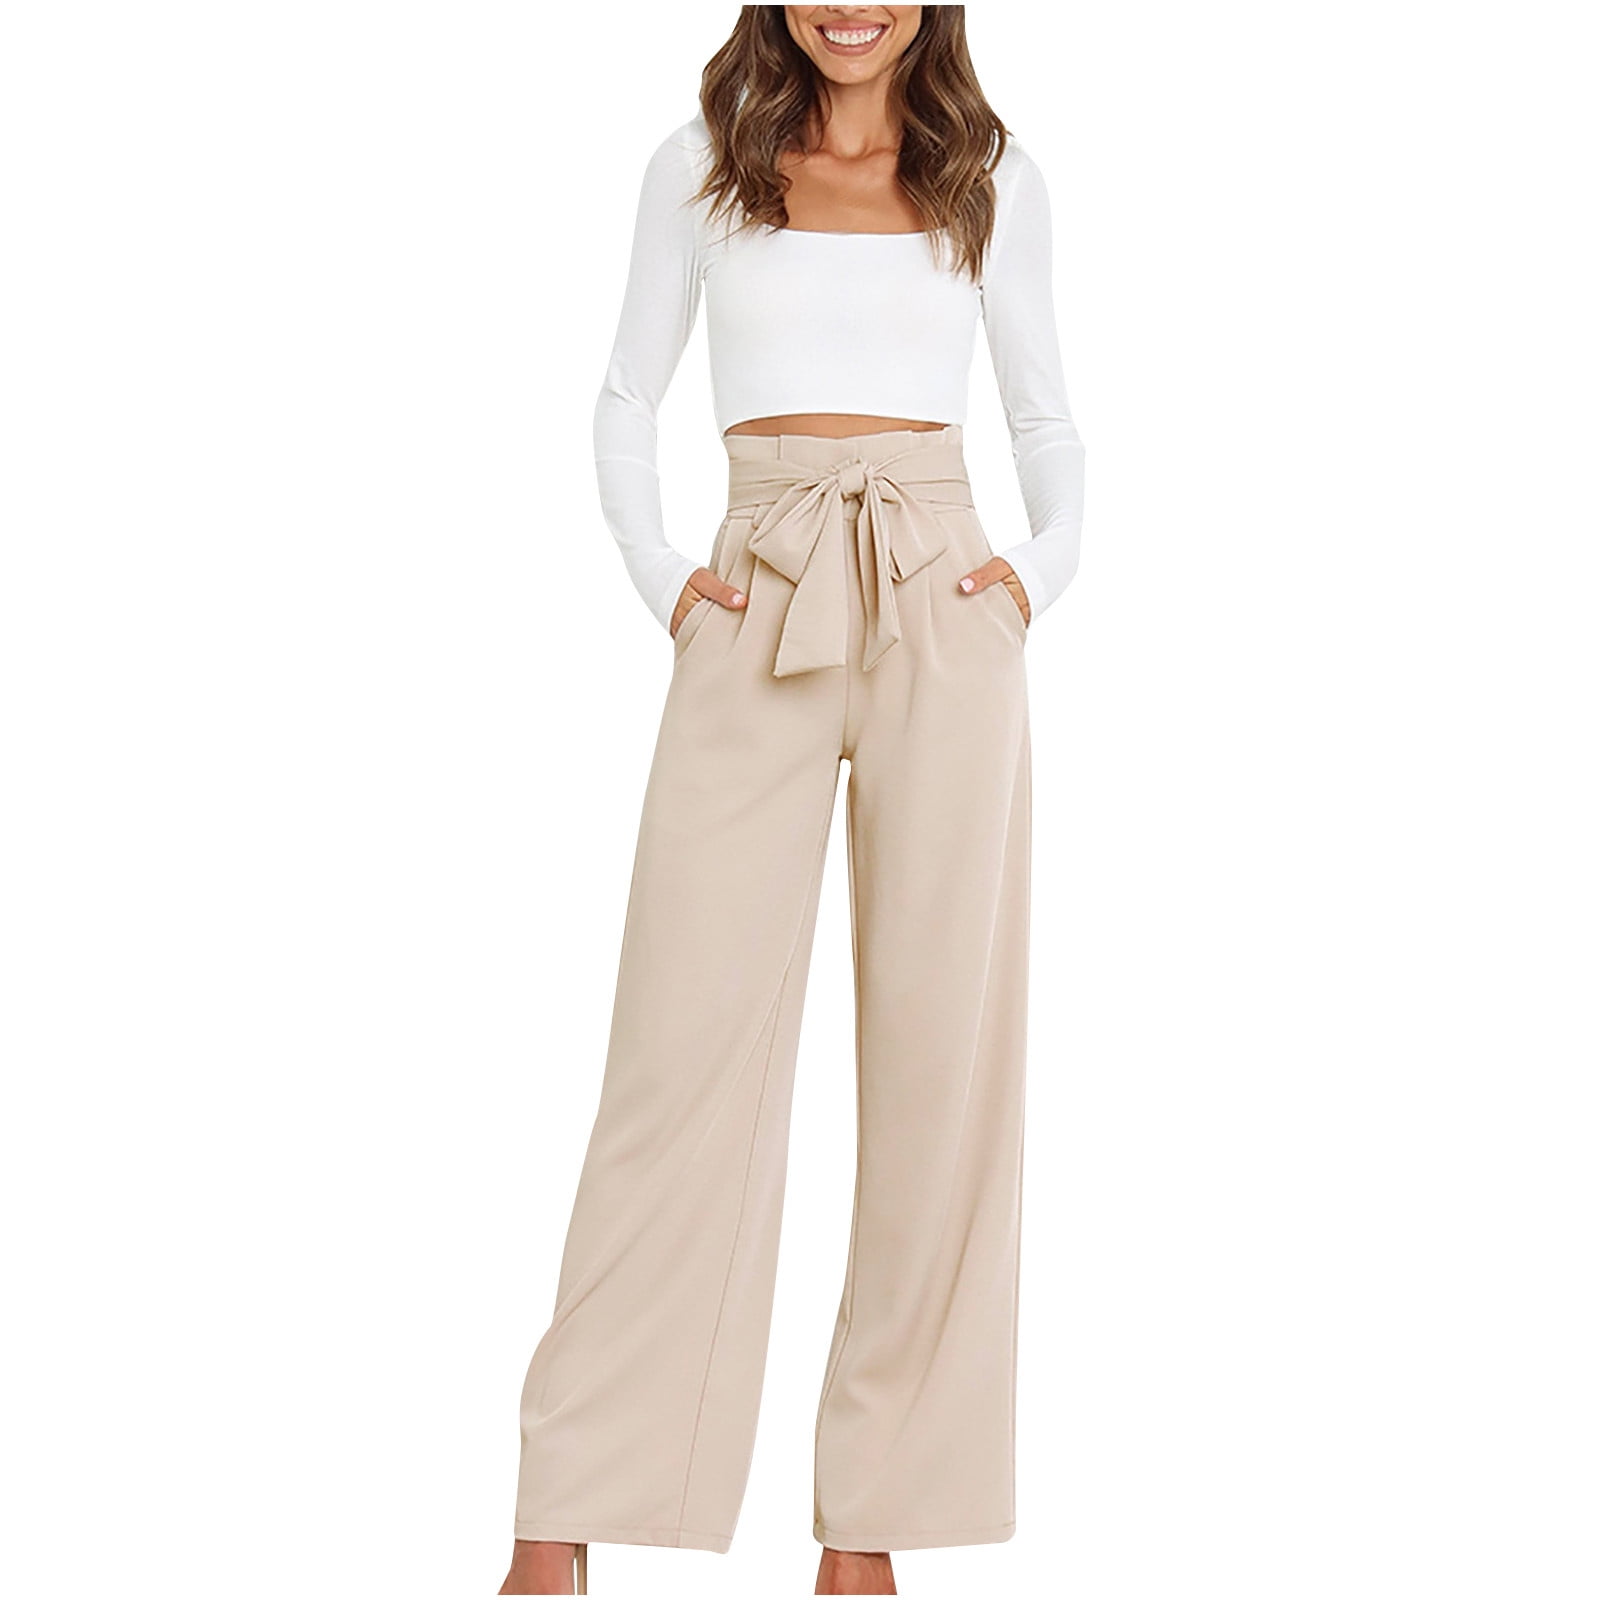 Mrat Full Length Pants Comfy Trousers with Pockets Fashion Ladies Summer  Casual Loose Pocket Solid Trousers Wide Leg Pants Workout Sports Hiking  Pants